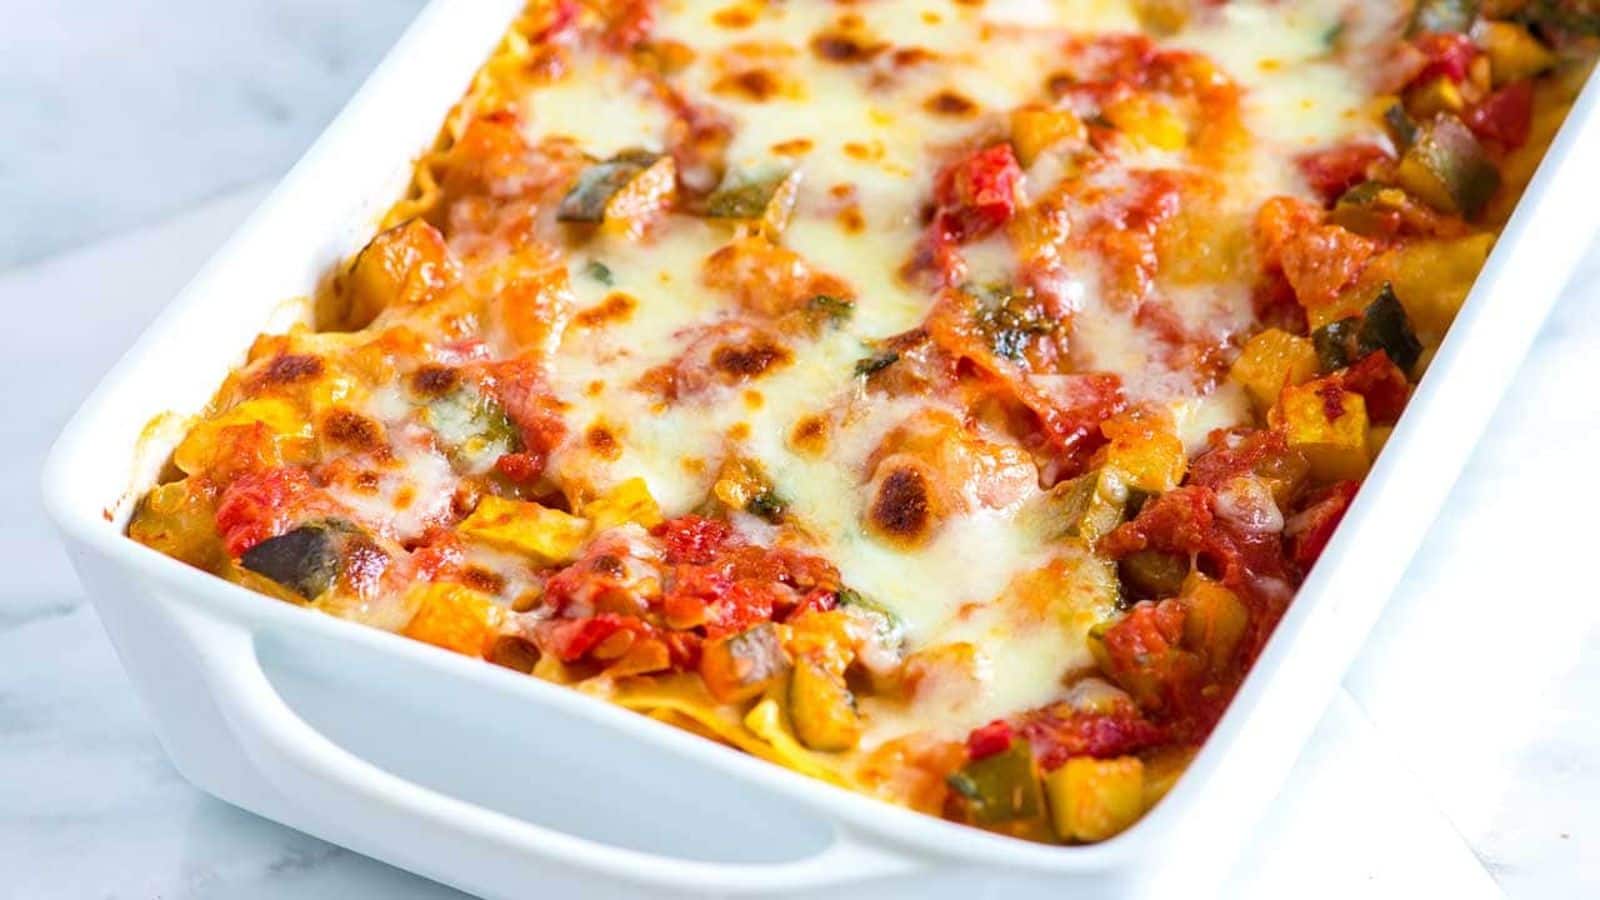 Try this classic veggie lasagna recipe for a flavorful day